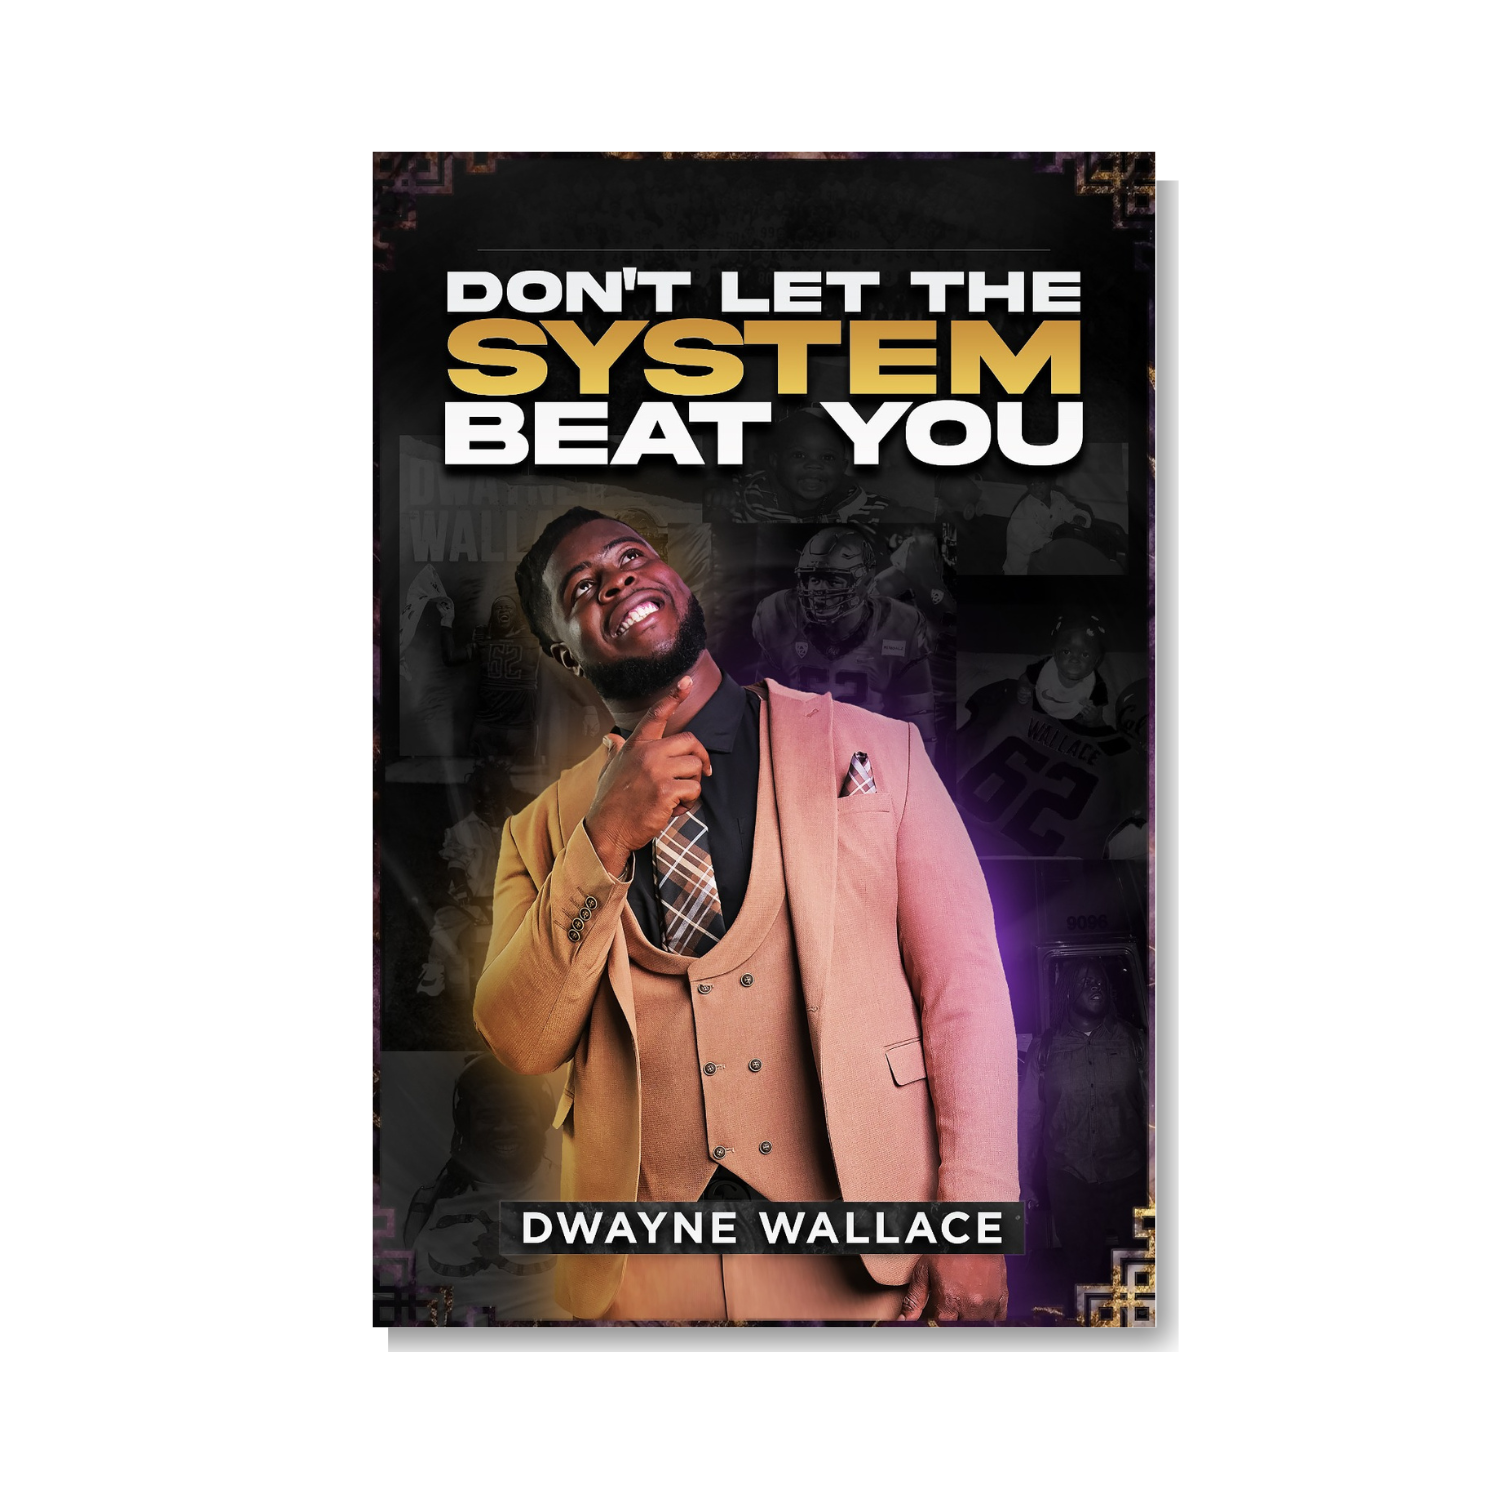 Don't Let the System Beat You by Dwayne Wallace